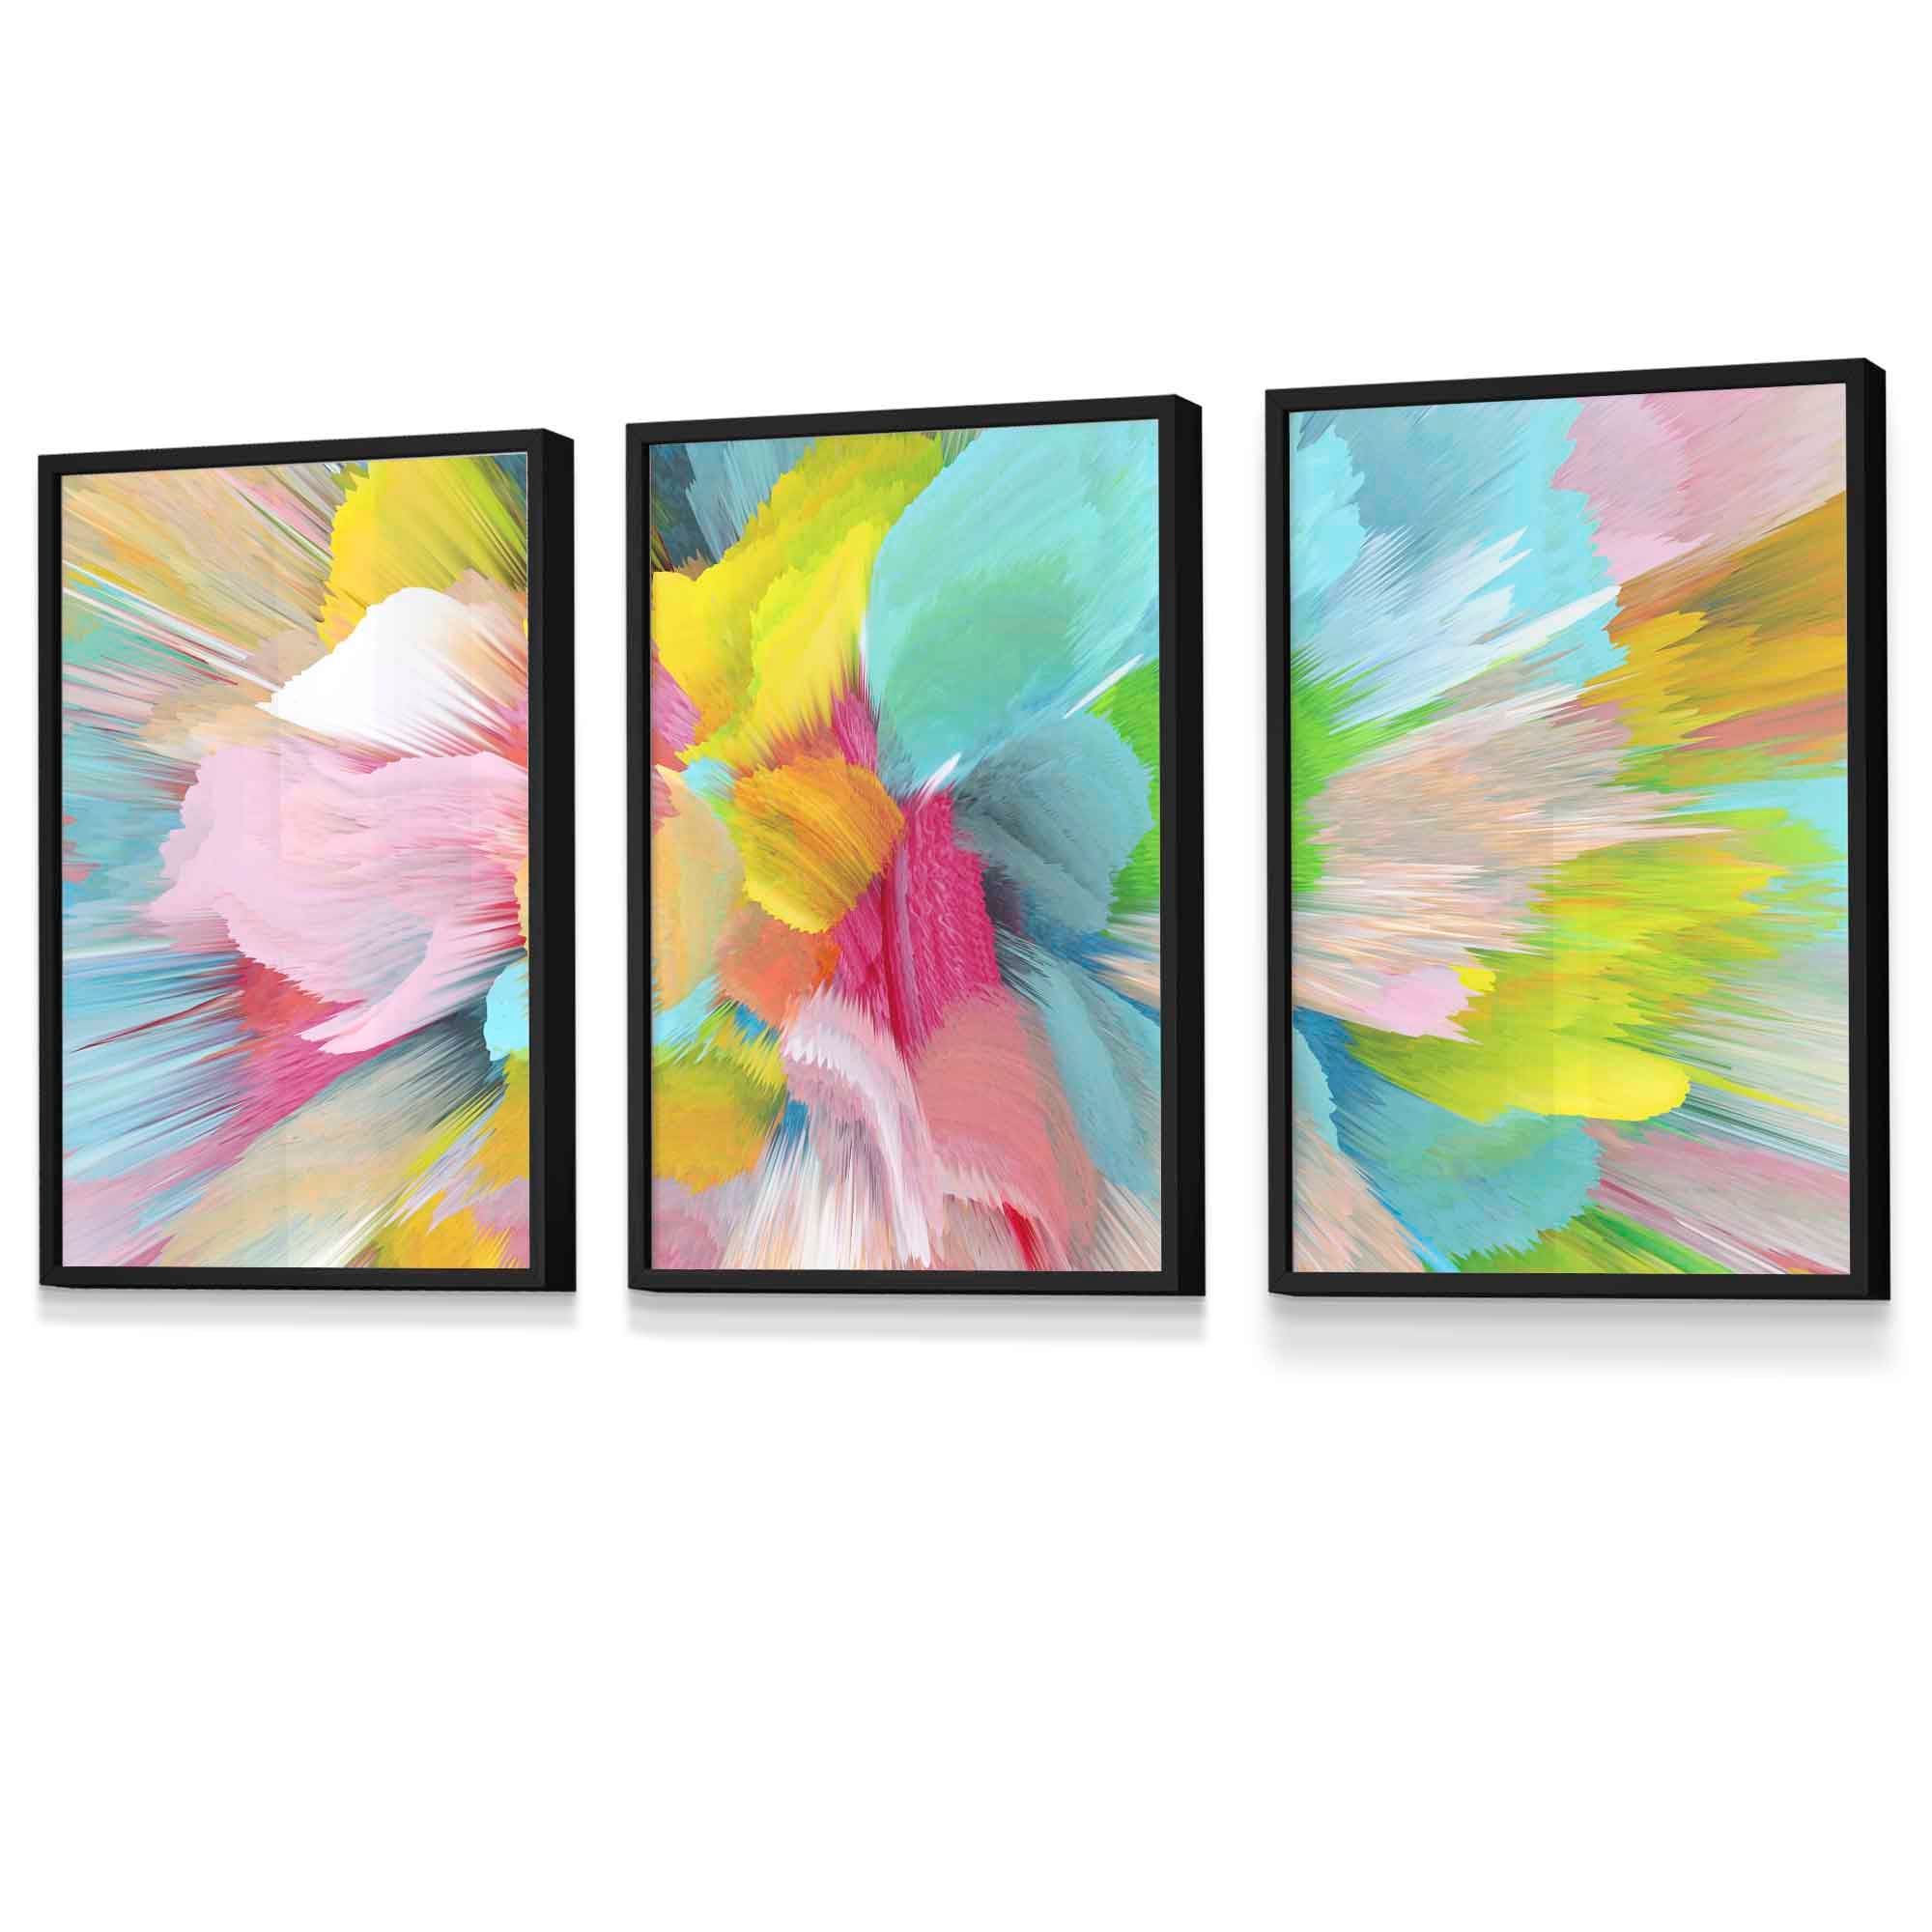 Set of 3 Abstract Bright Painted Fractal Wall Art Prints Framed Colourful Posters | Artze Wall Art UK